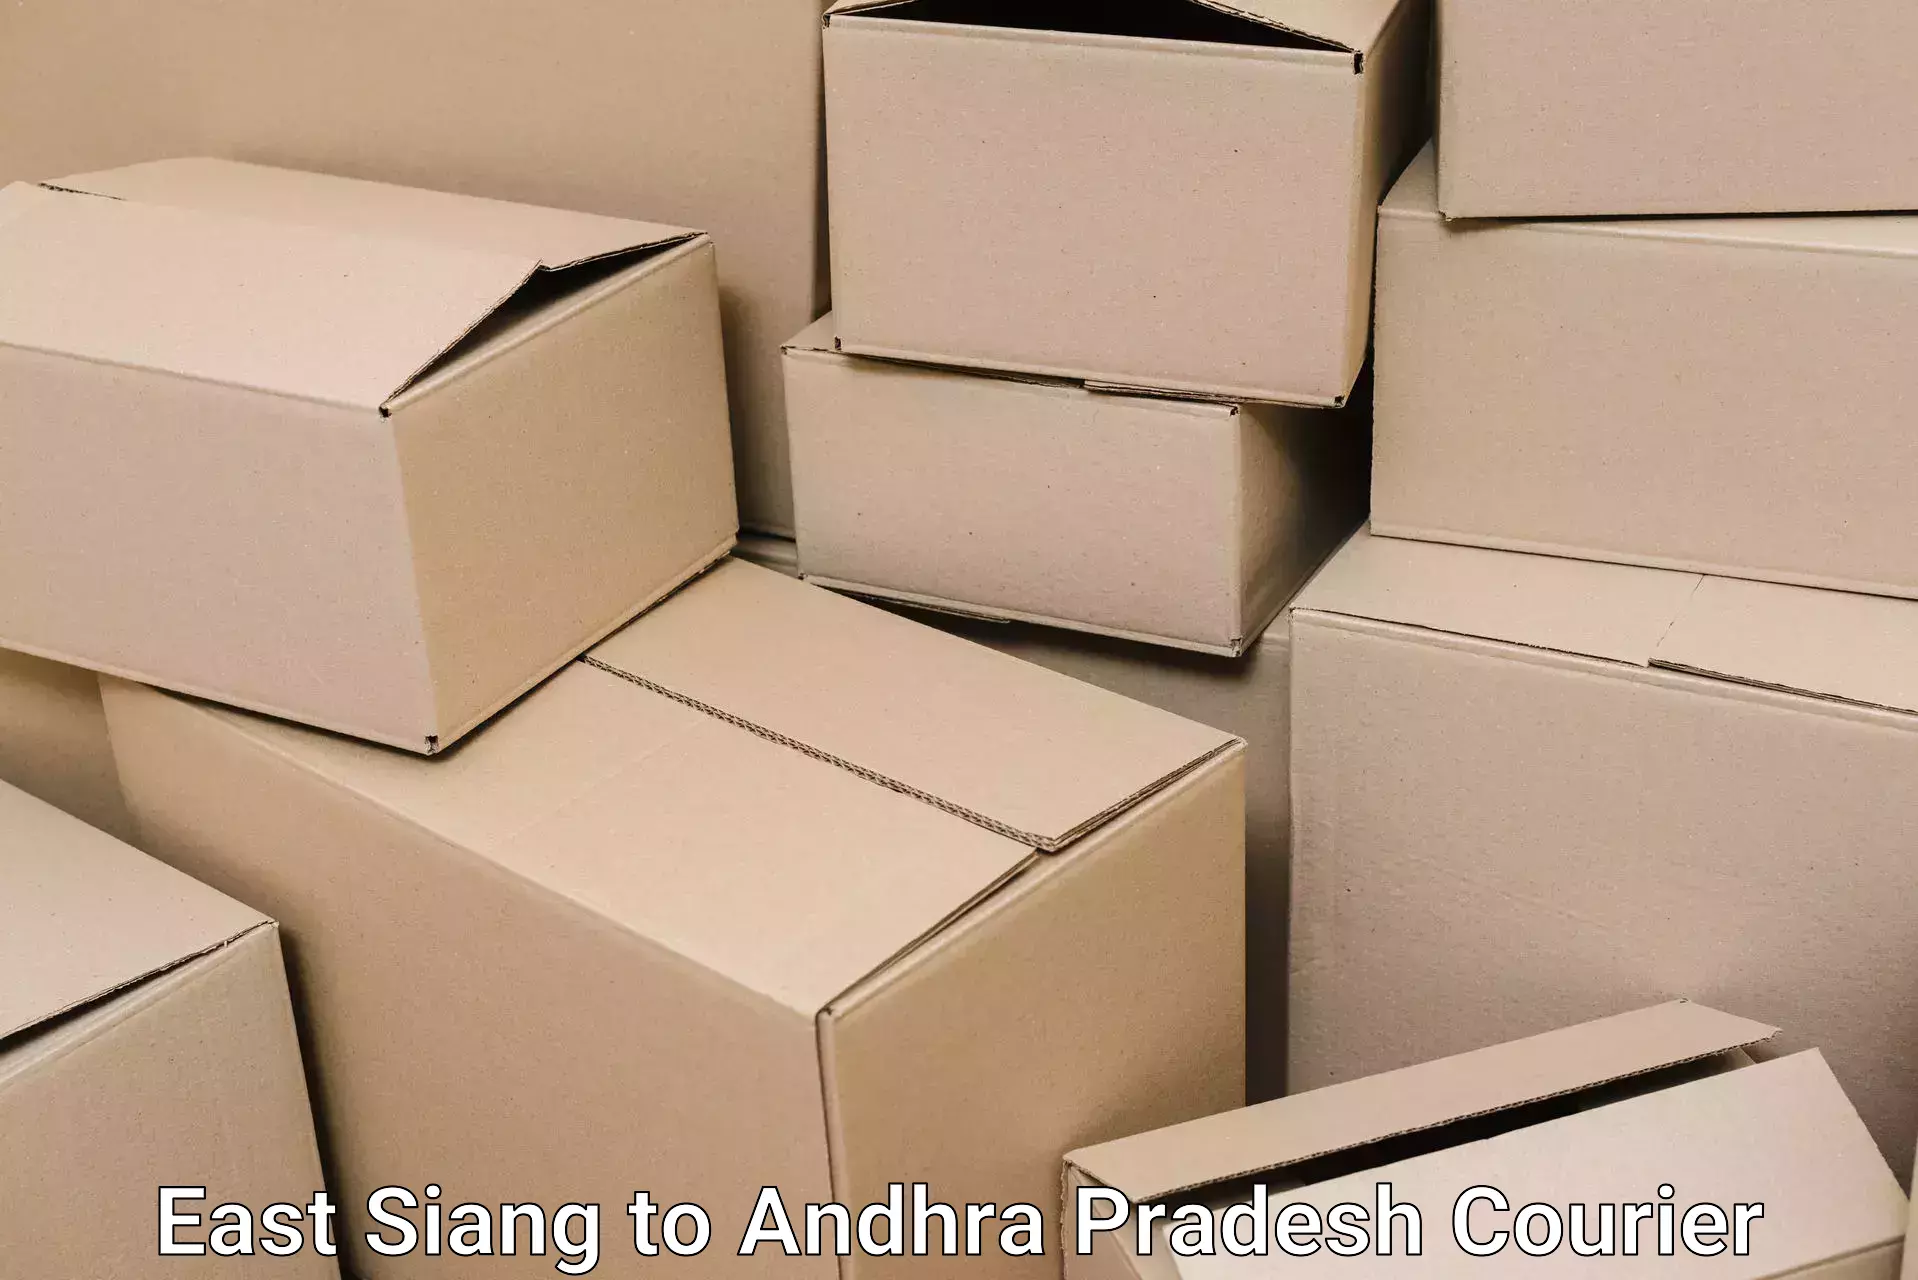 Dependable moving services East Siang to Visakhapatnam Port